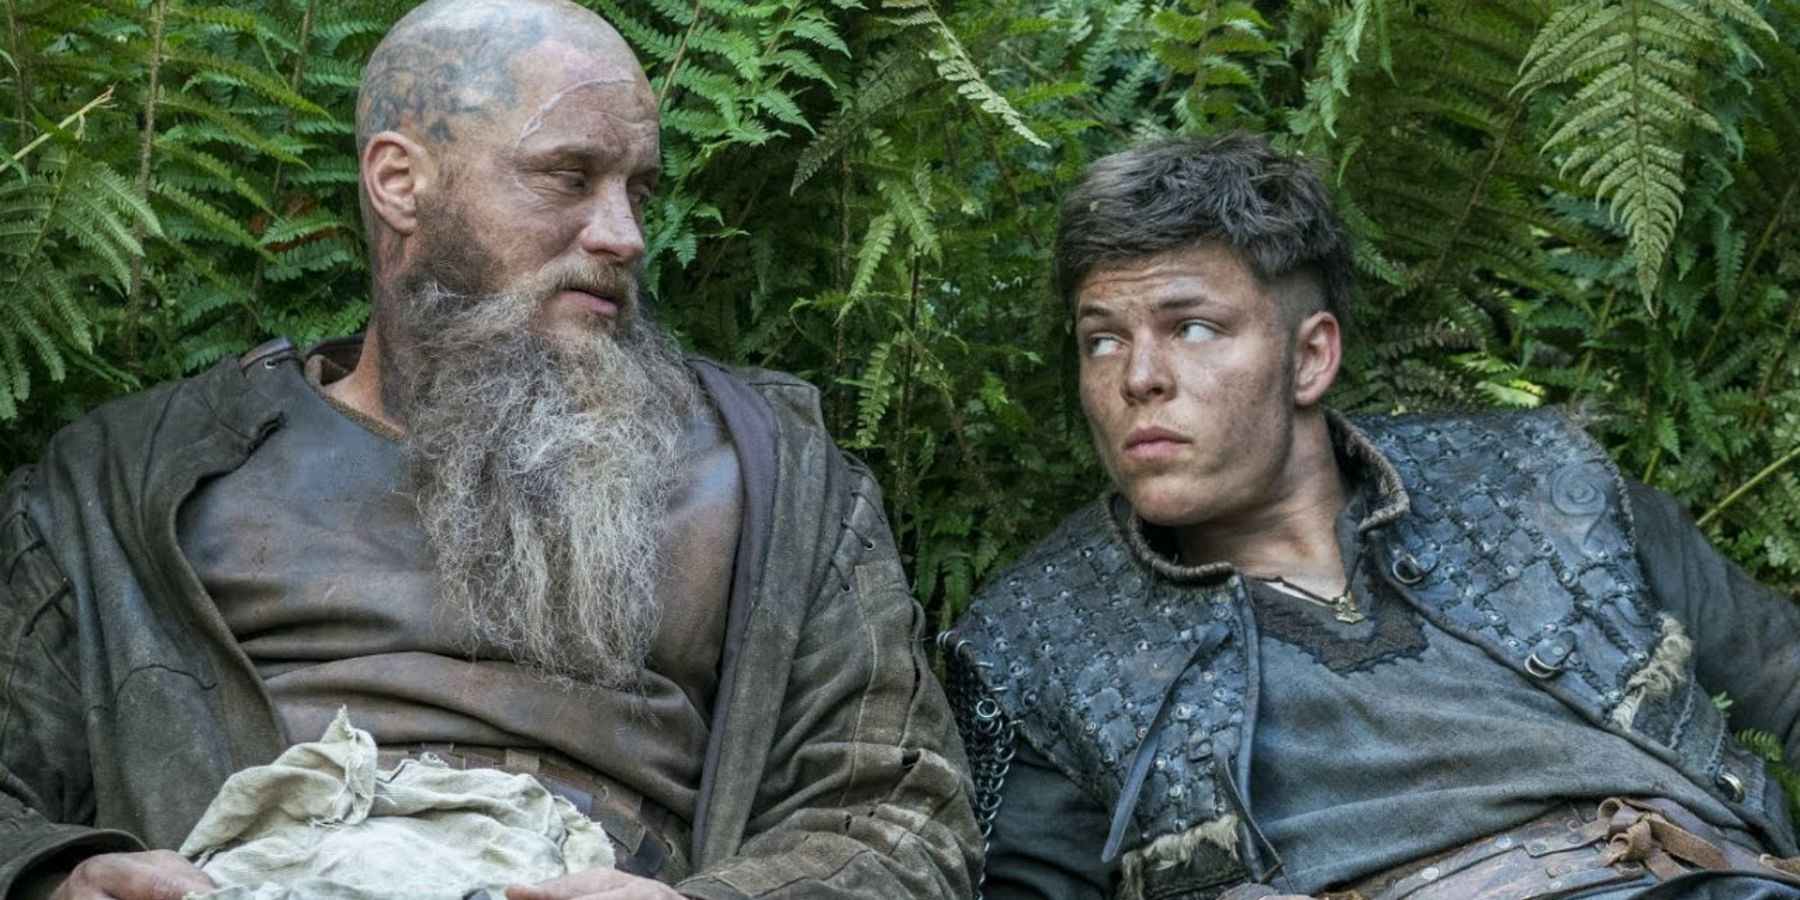 Vikings - Ivar And Ragnar laying down and having a final talk